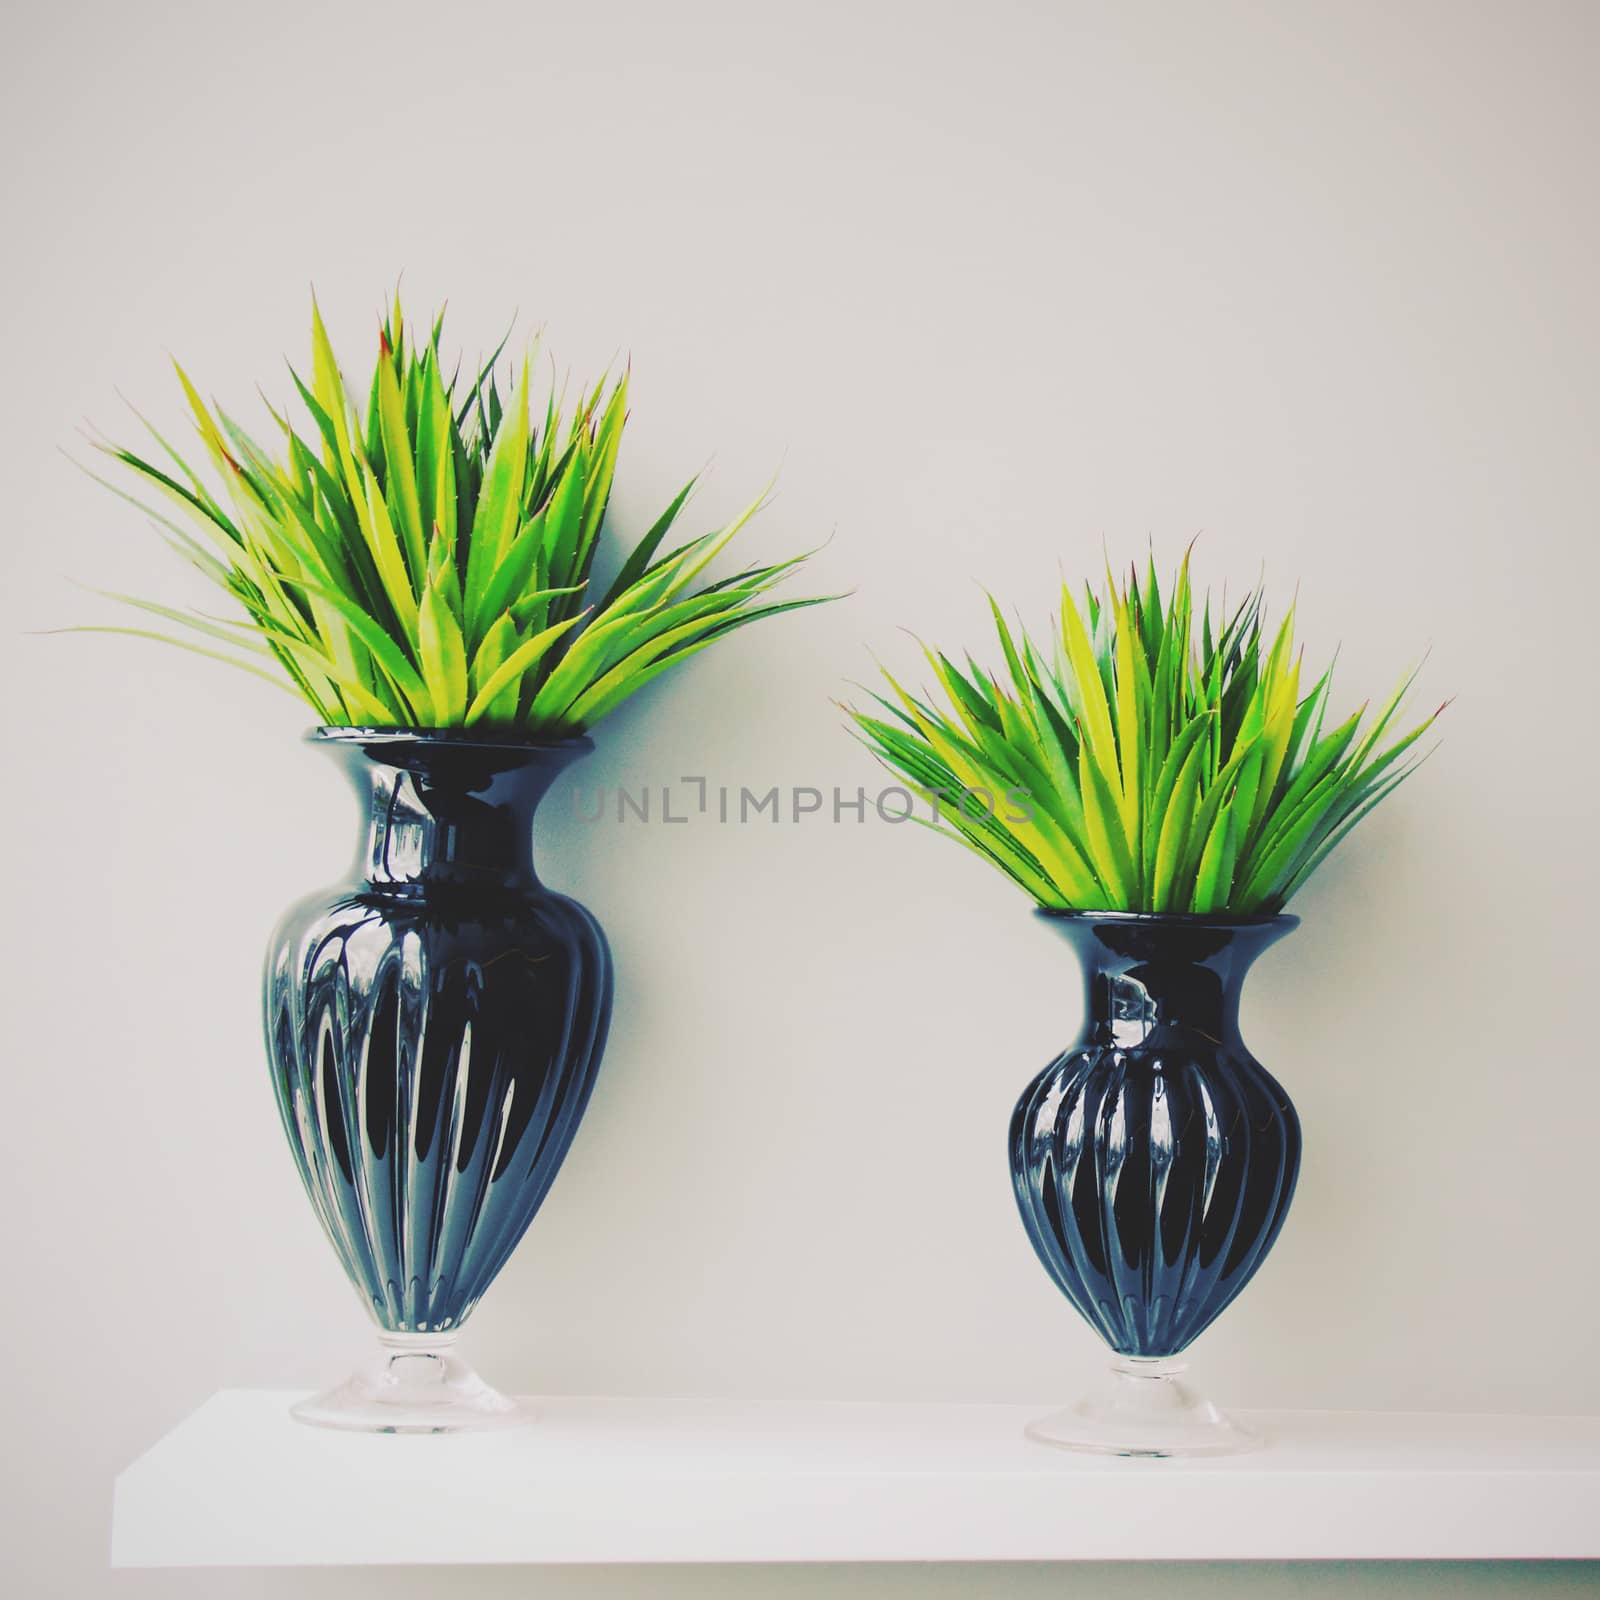 Plant in black vase decorated for room, retro filter effect